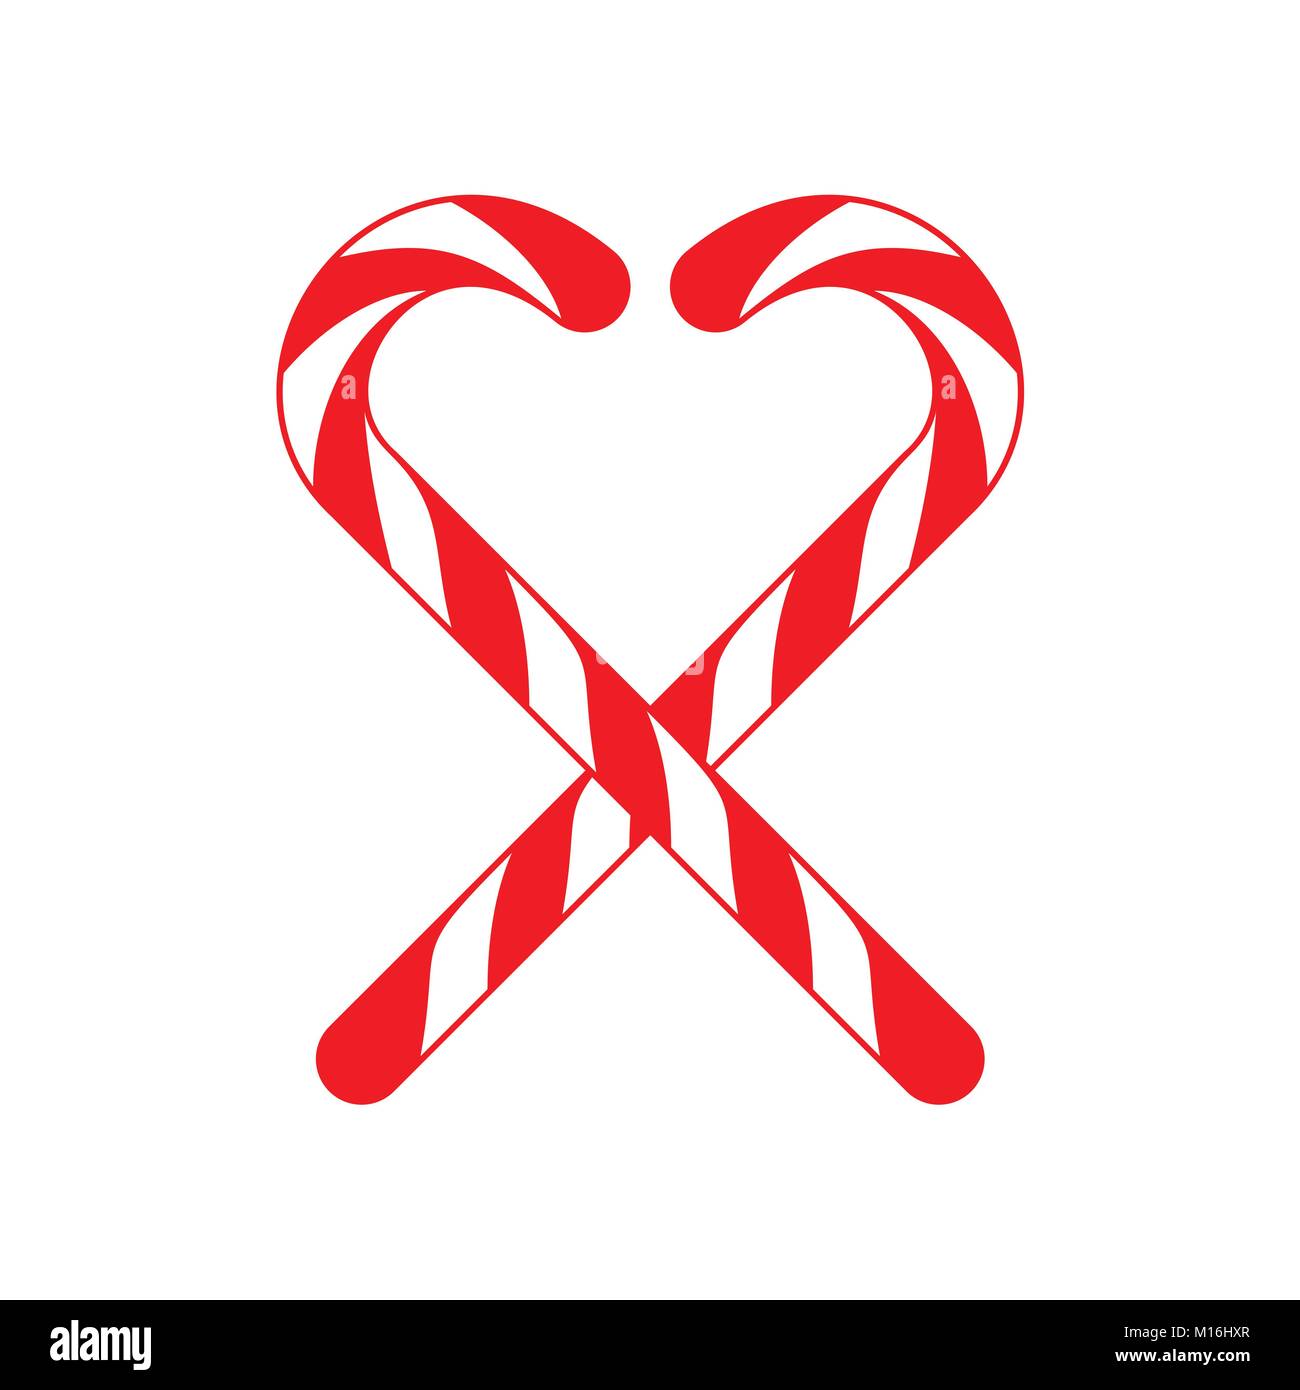 Christmas Candy Cane Cross Love Vector Graphic Illustration Sign Symbol Design Stock Vector